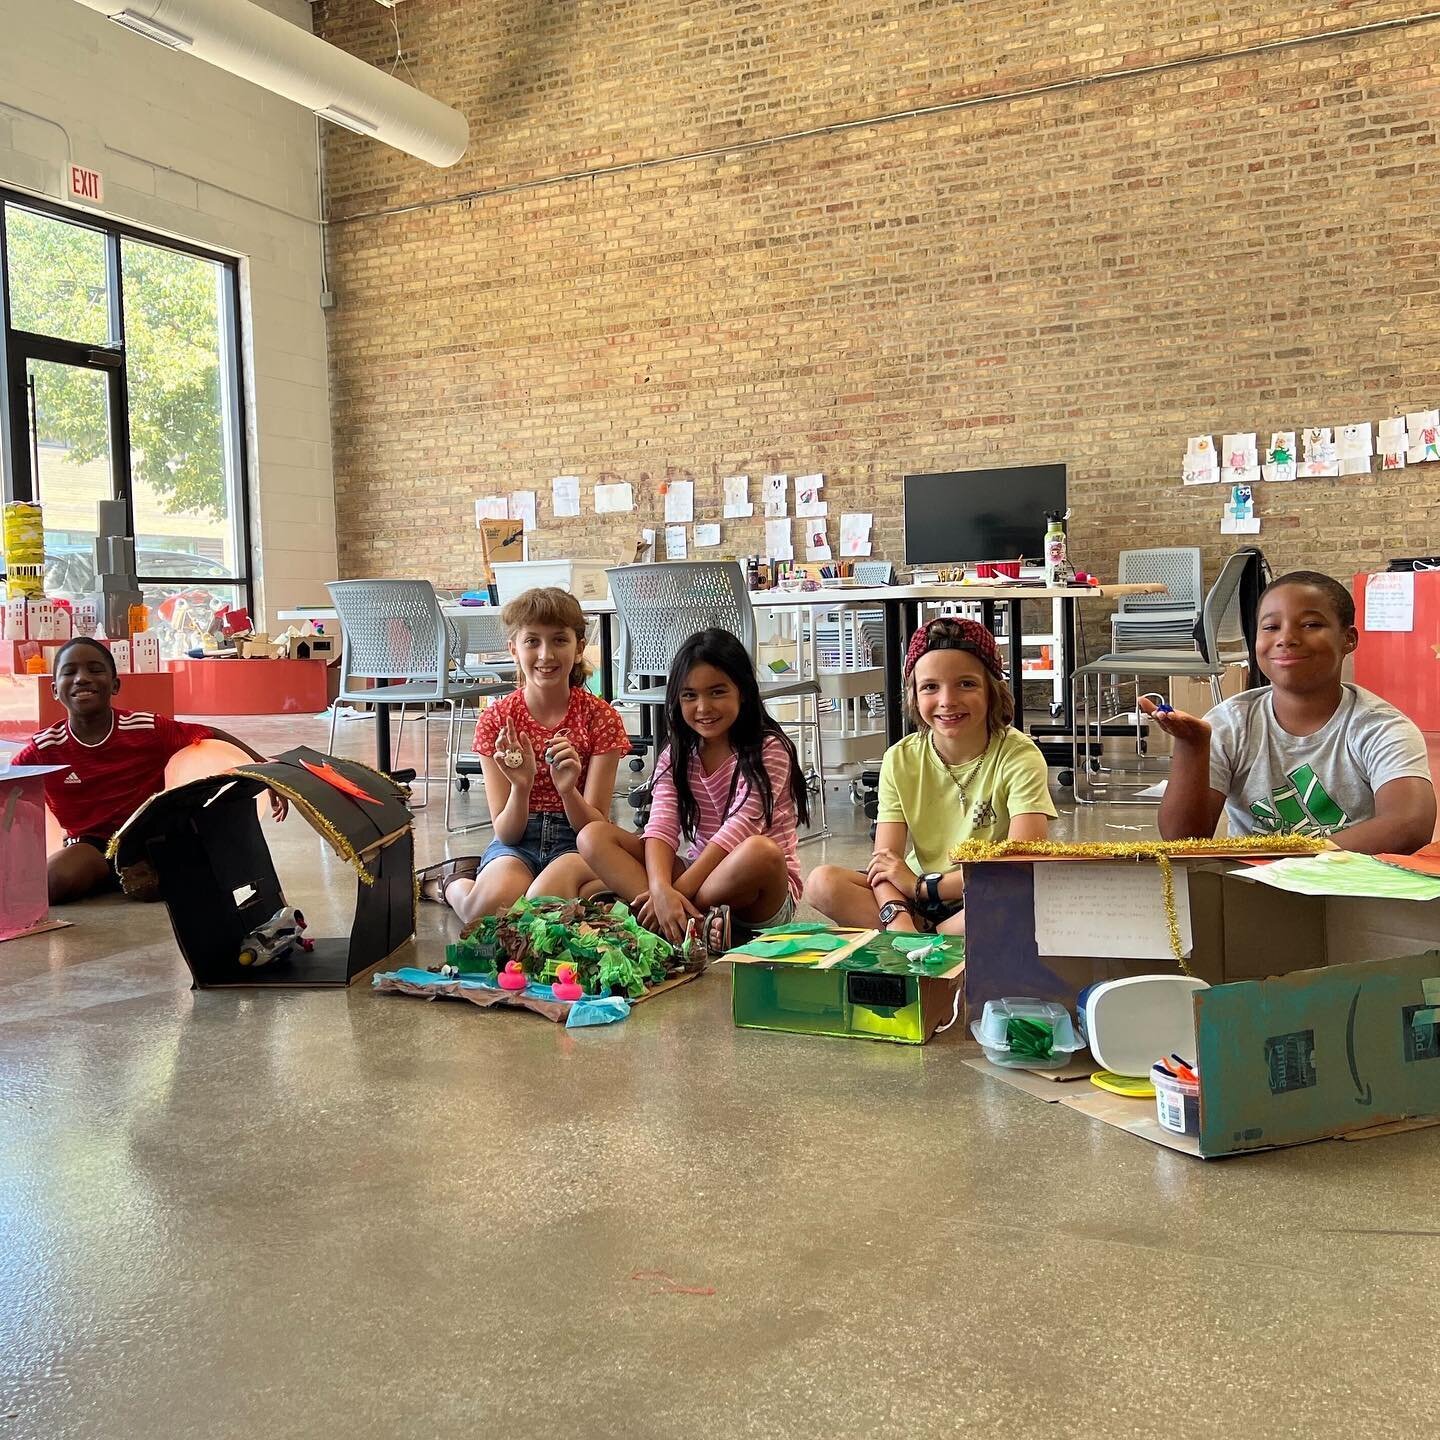 Last week we finished our Creature Cribs summer program. Students made homes for Chicago wildlife like coyotes, bats, mink, and more. They built models of their &lsquo;cribs&rsquo; using art supplies and designed and added components using Tinkercad,